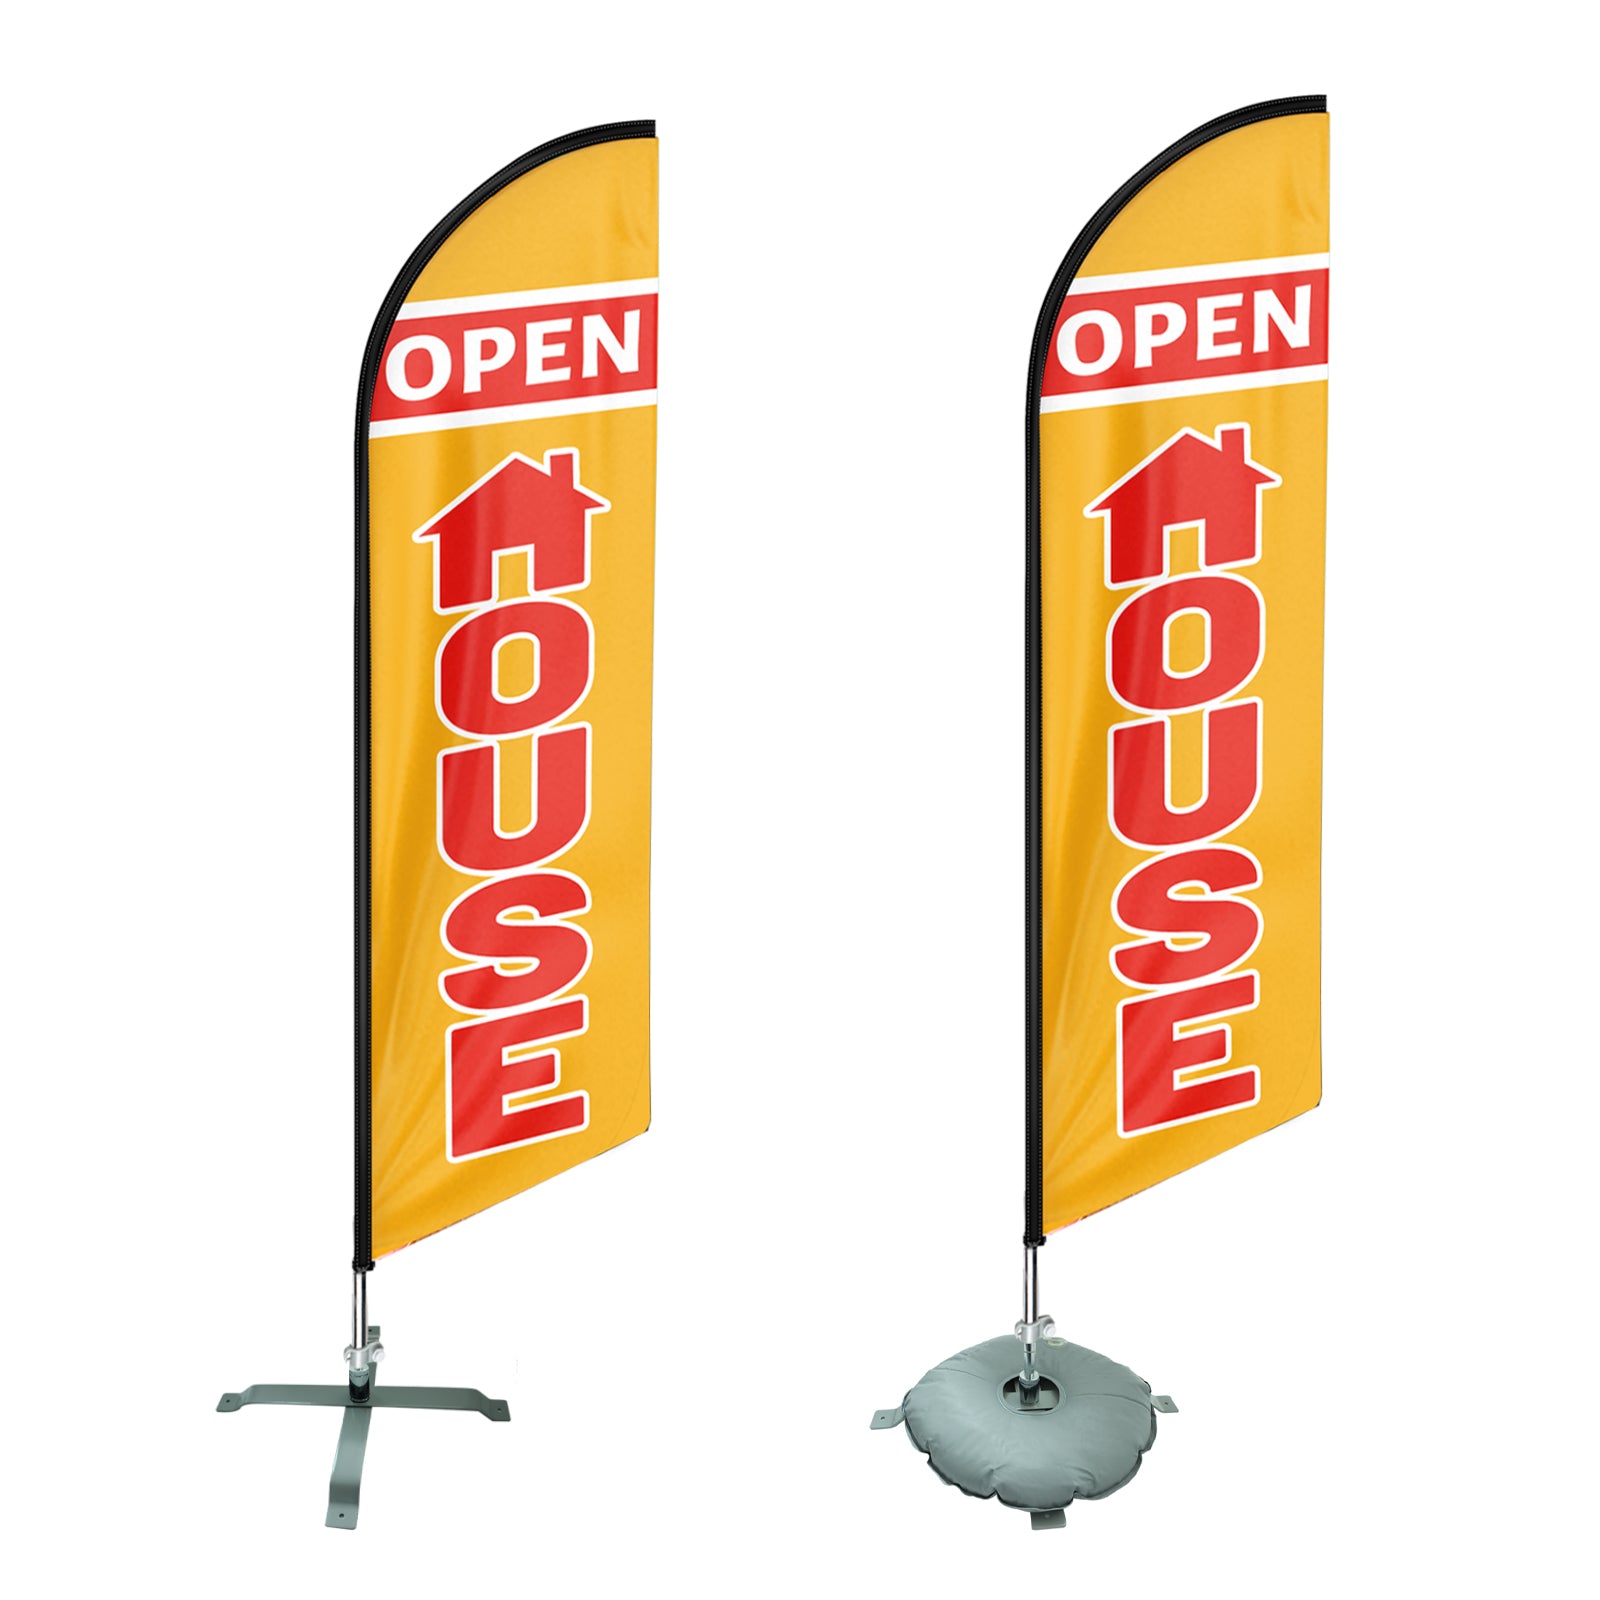 QSUM Feather Flag Bass Stand, Cross Base for Indoor/Outdoor Swooper Flag with Sandbag/Water Bag Flag Pole Accessories